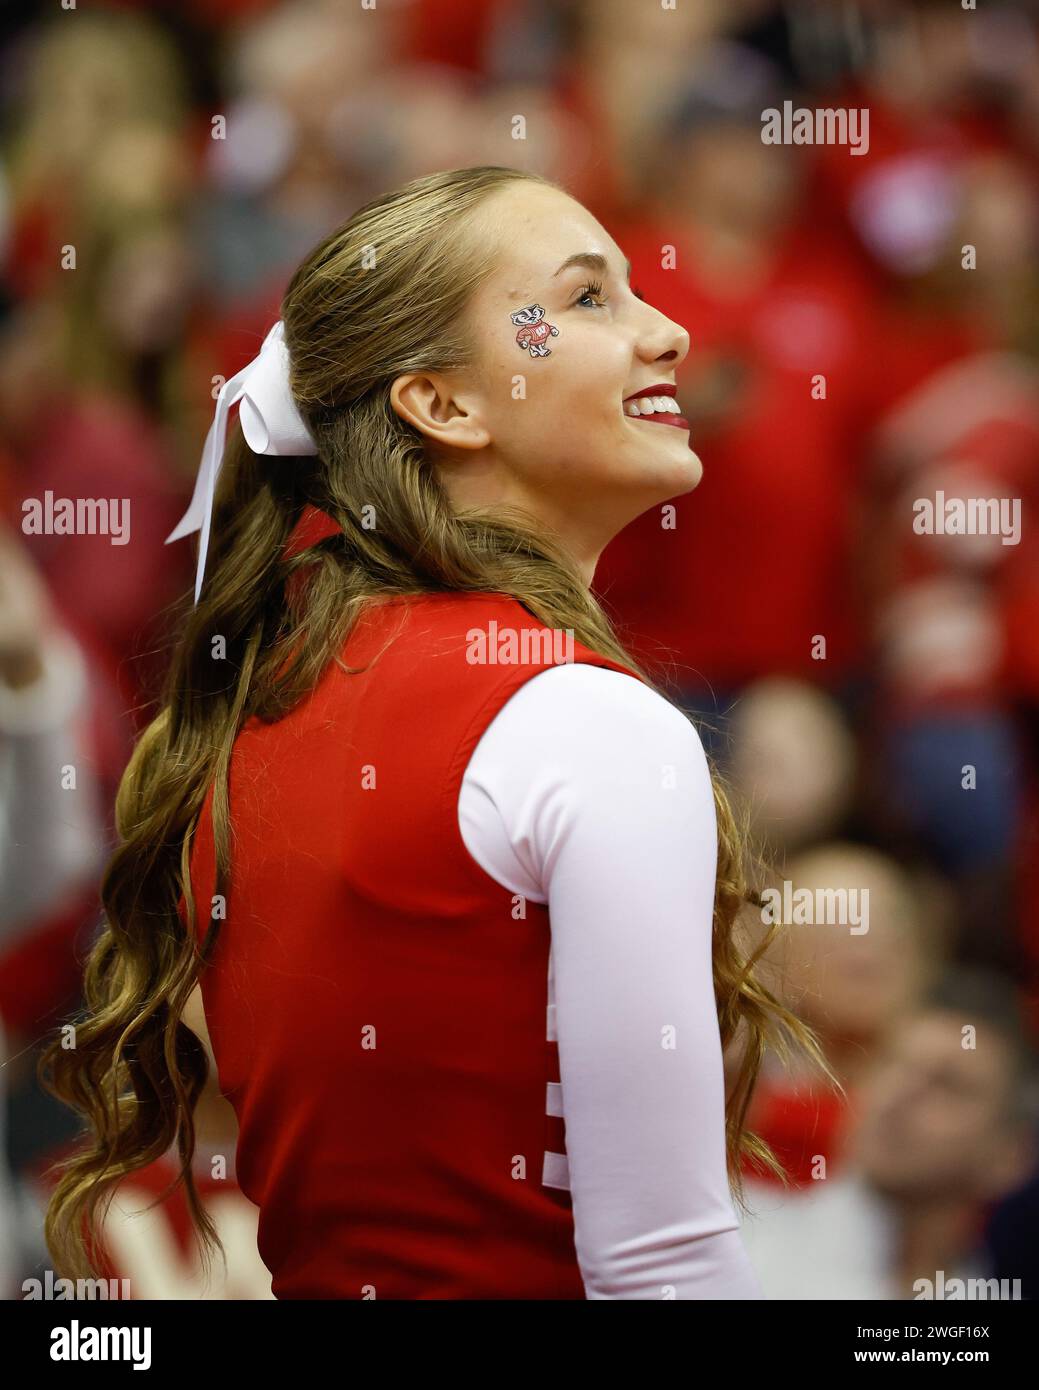 Madison, WI, USA. 4th Feb, 2024. Wisconsin Badgers Cheerleader during the NCAA basketball game between the Purdue Boilermakers and the Wisconsin Badgers at the Kohl Center in Madison, WI. Darren Lee/CSM (Credit Image: © Darren Lee/Cal Sport Media). Credit: csm/Alamy Live News Stock Photo